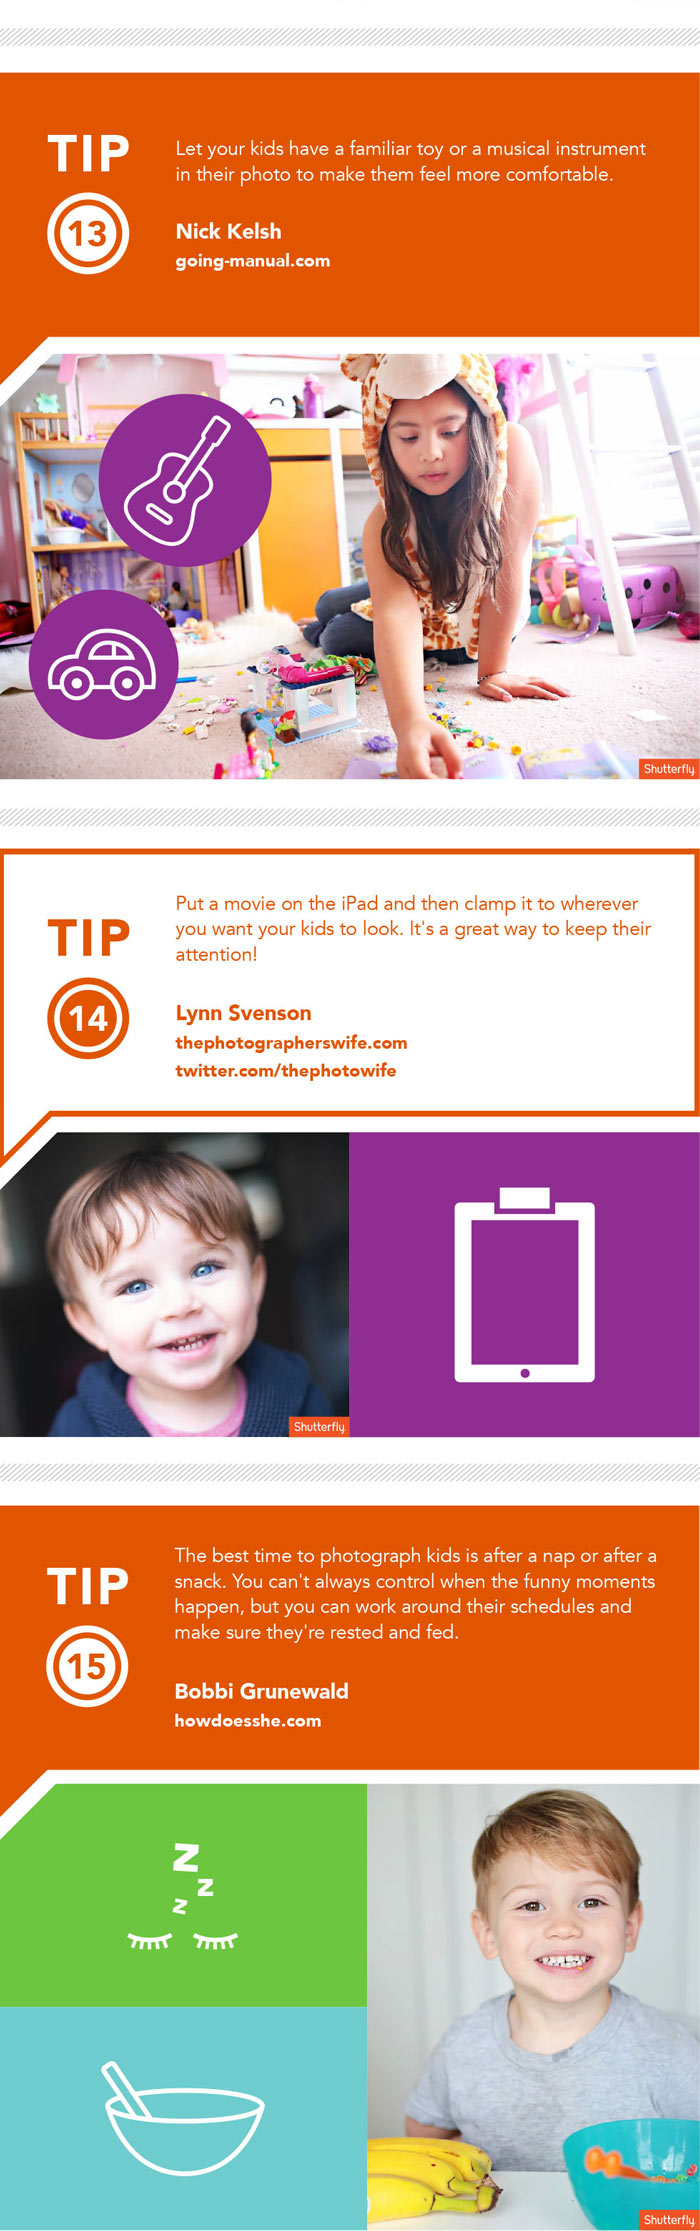 The Shutterfly Guide to Taking Photos of Wiggly Kids